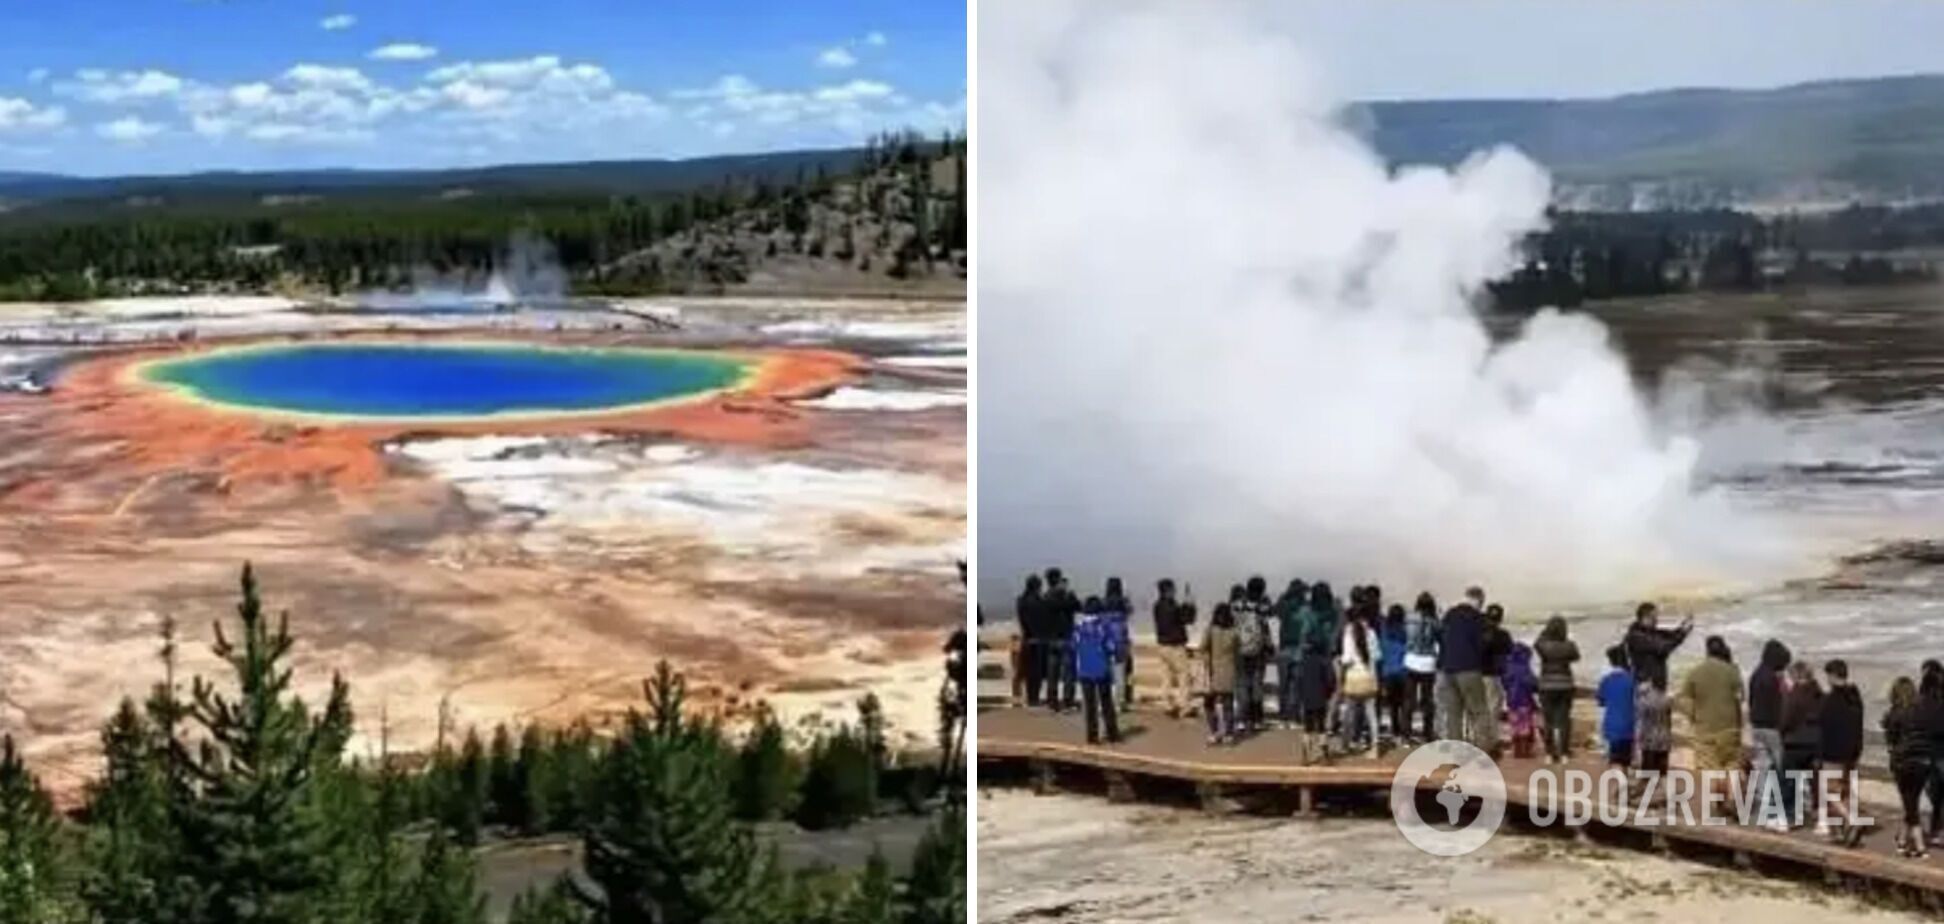 Yellowstone Park in reality is different from the photo.